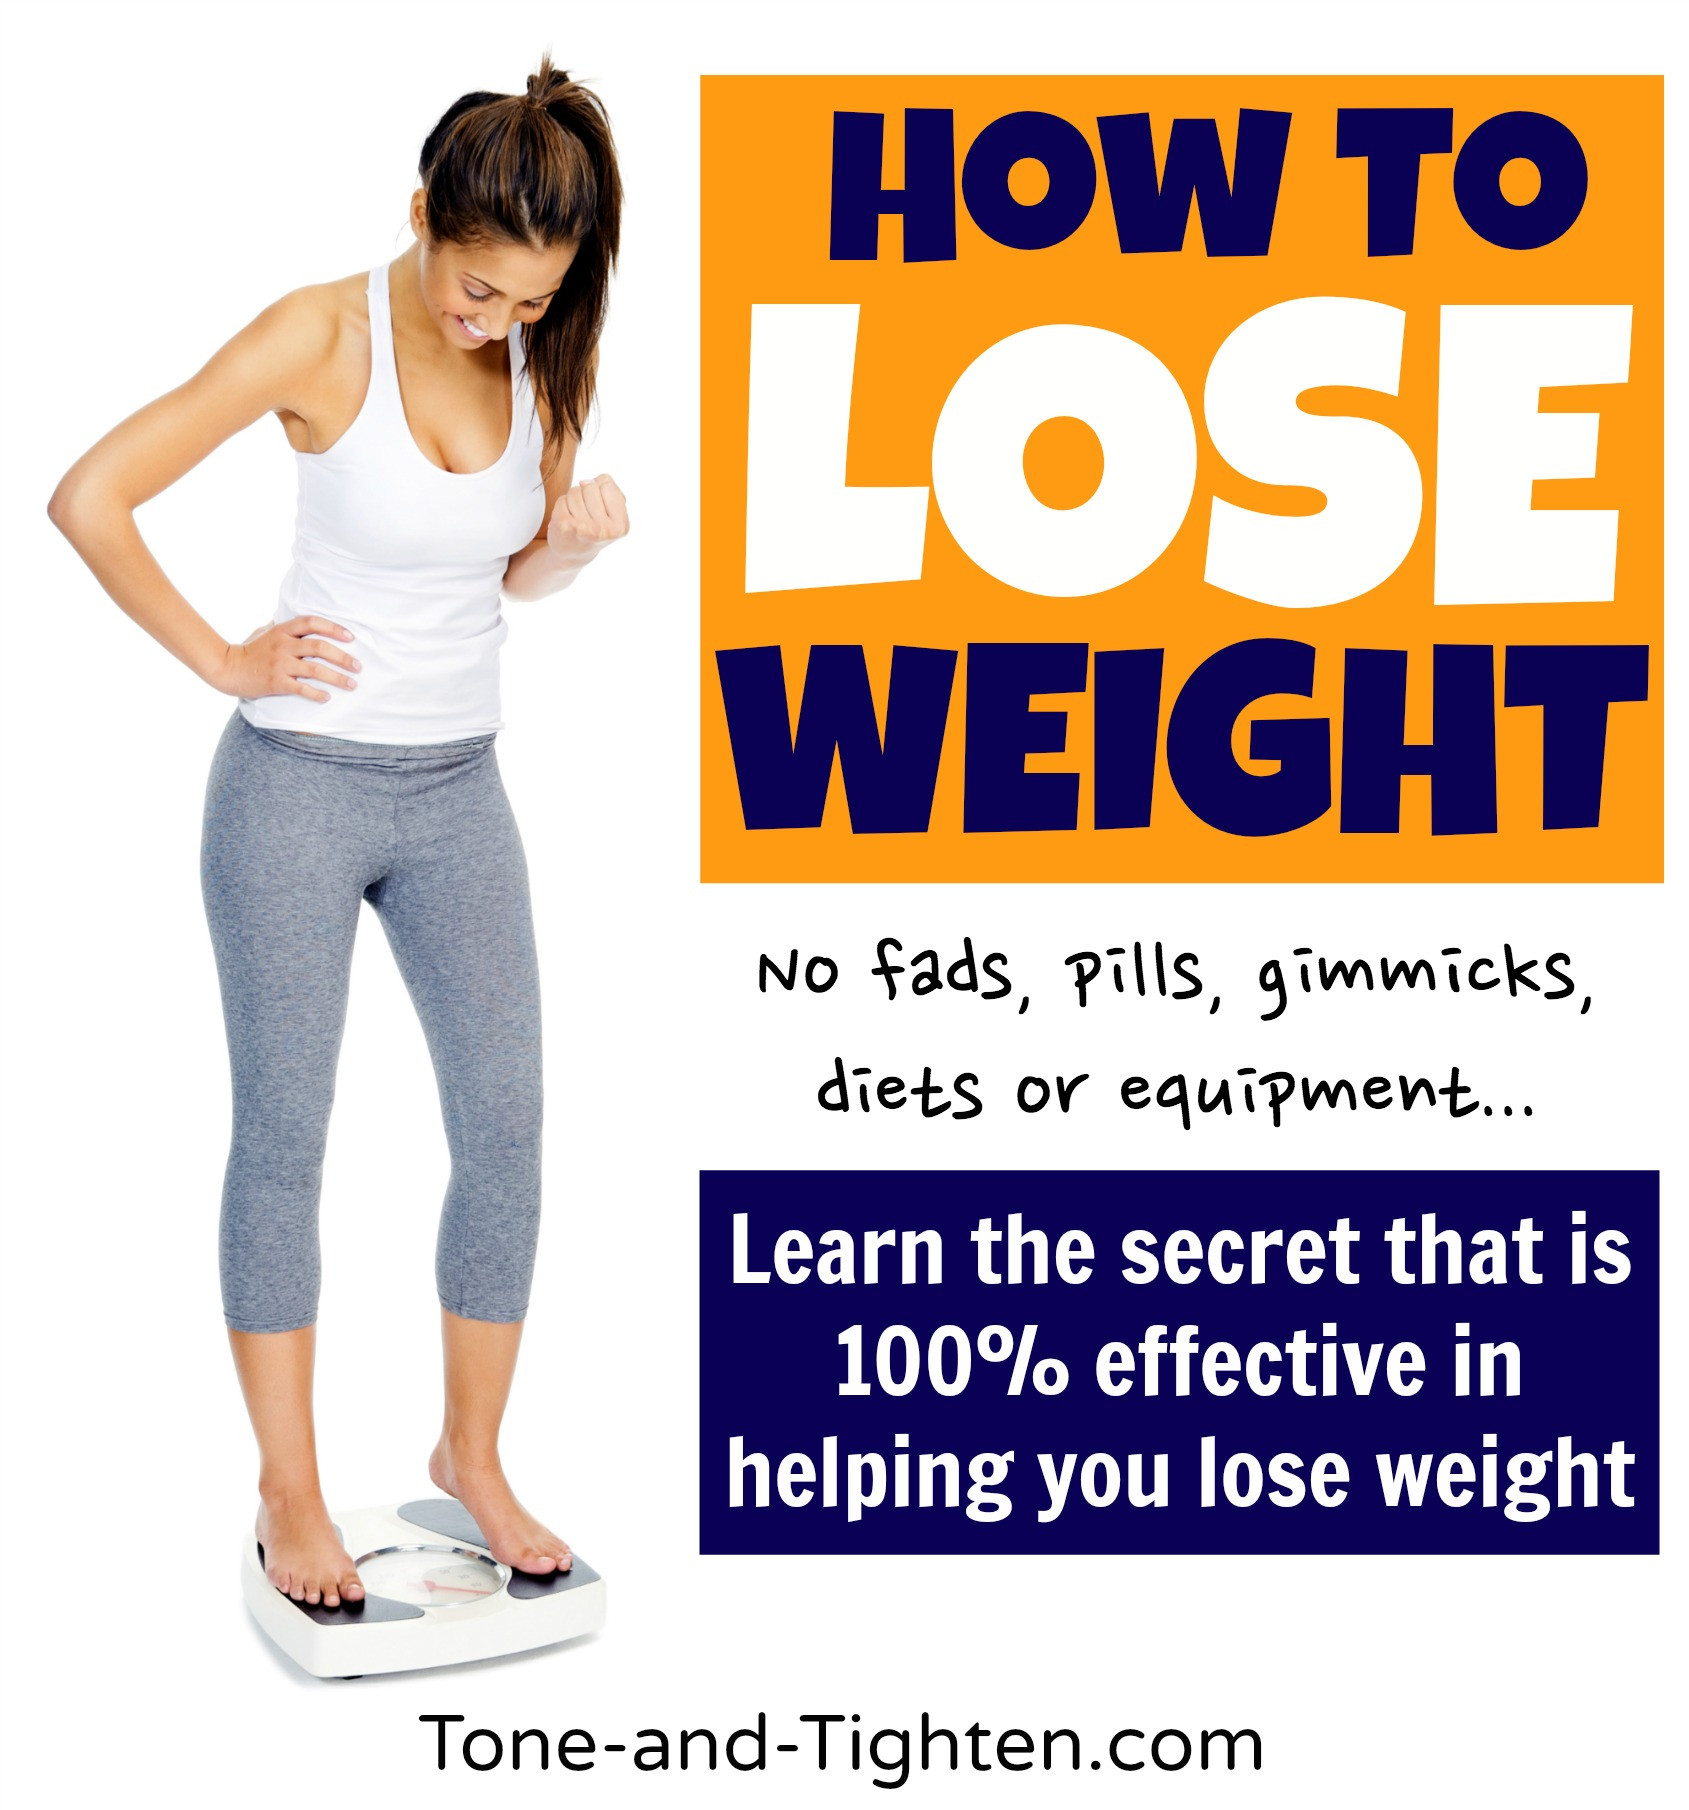 How To Lose Weight Healthy
 How to lose weight – The one secret you need to drop